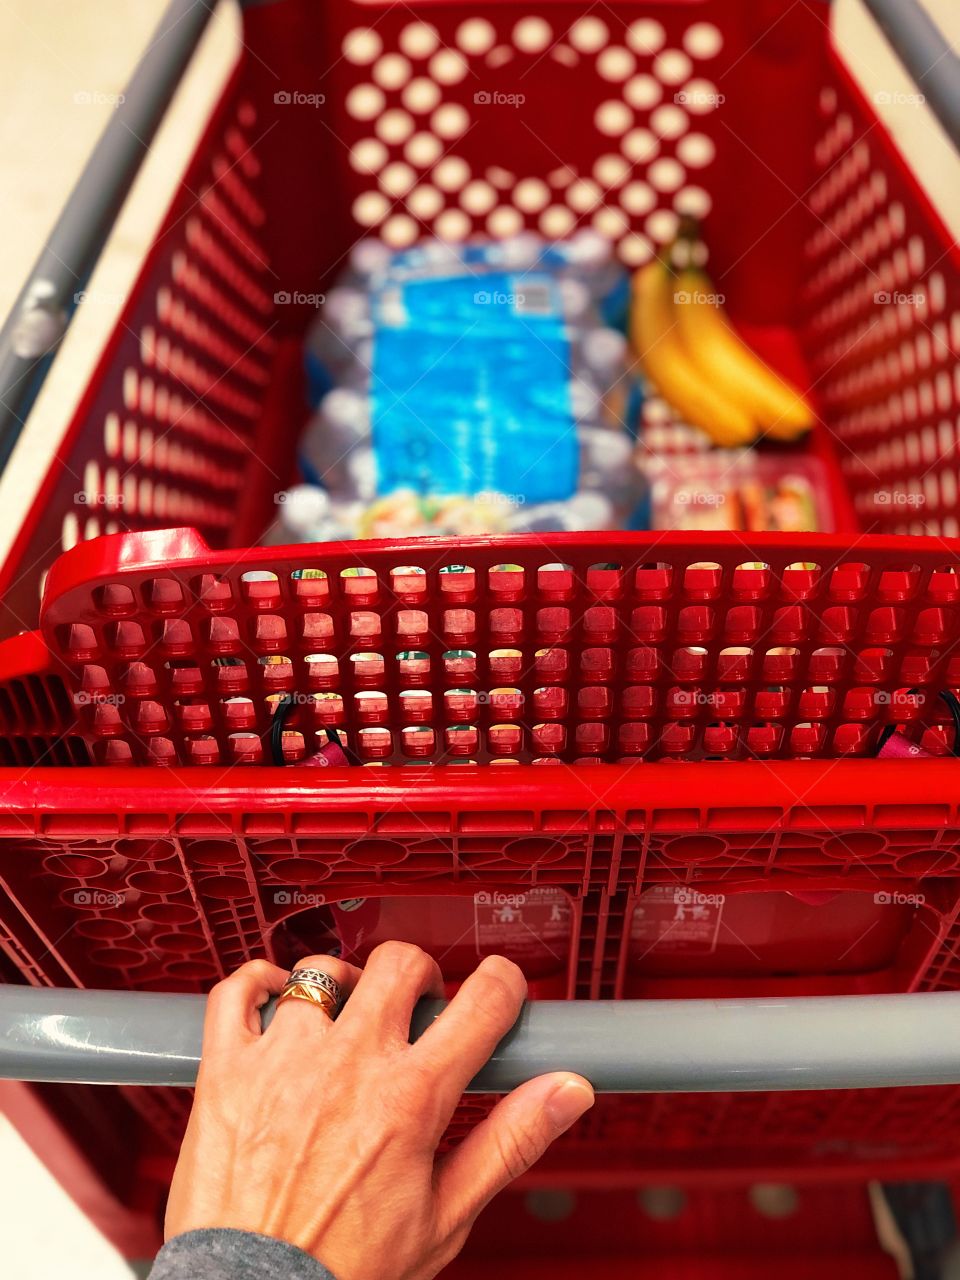 Woman Shopping In Target, Daily Grocery Shopping Trip, Target Shopping Trip, Pushing A Cart In Target, Target Cart, Grocery Shopping, Hands Pushing A Cart, Shopping For Food, SHIPT Shop, Shipt Shop In Target, Buying Items In A Store, Shopping Cart